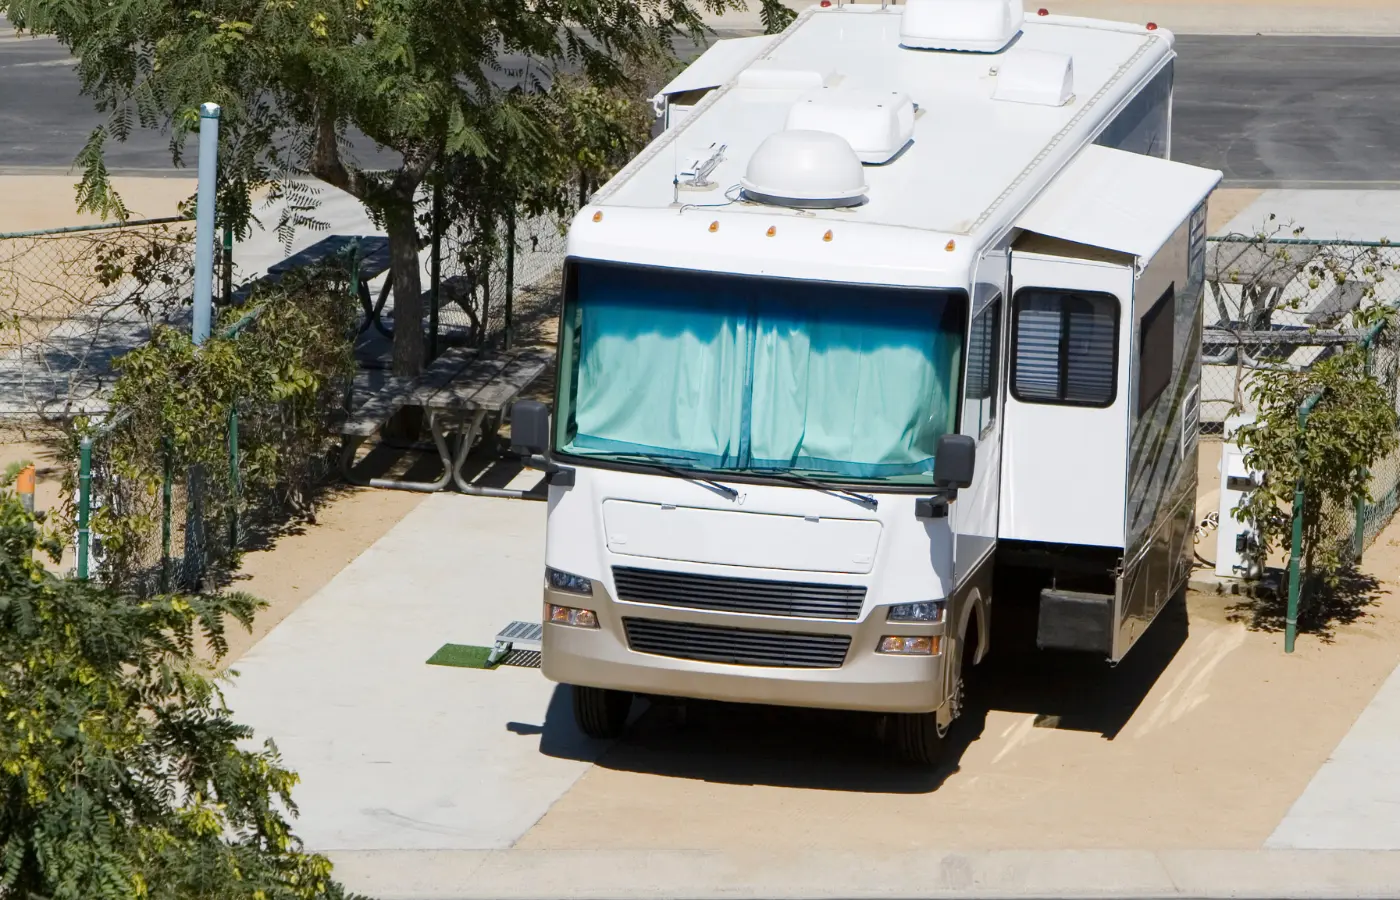 5 important ways to check and take care of the slide-outs on your RV